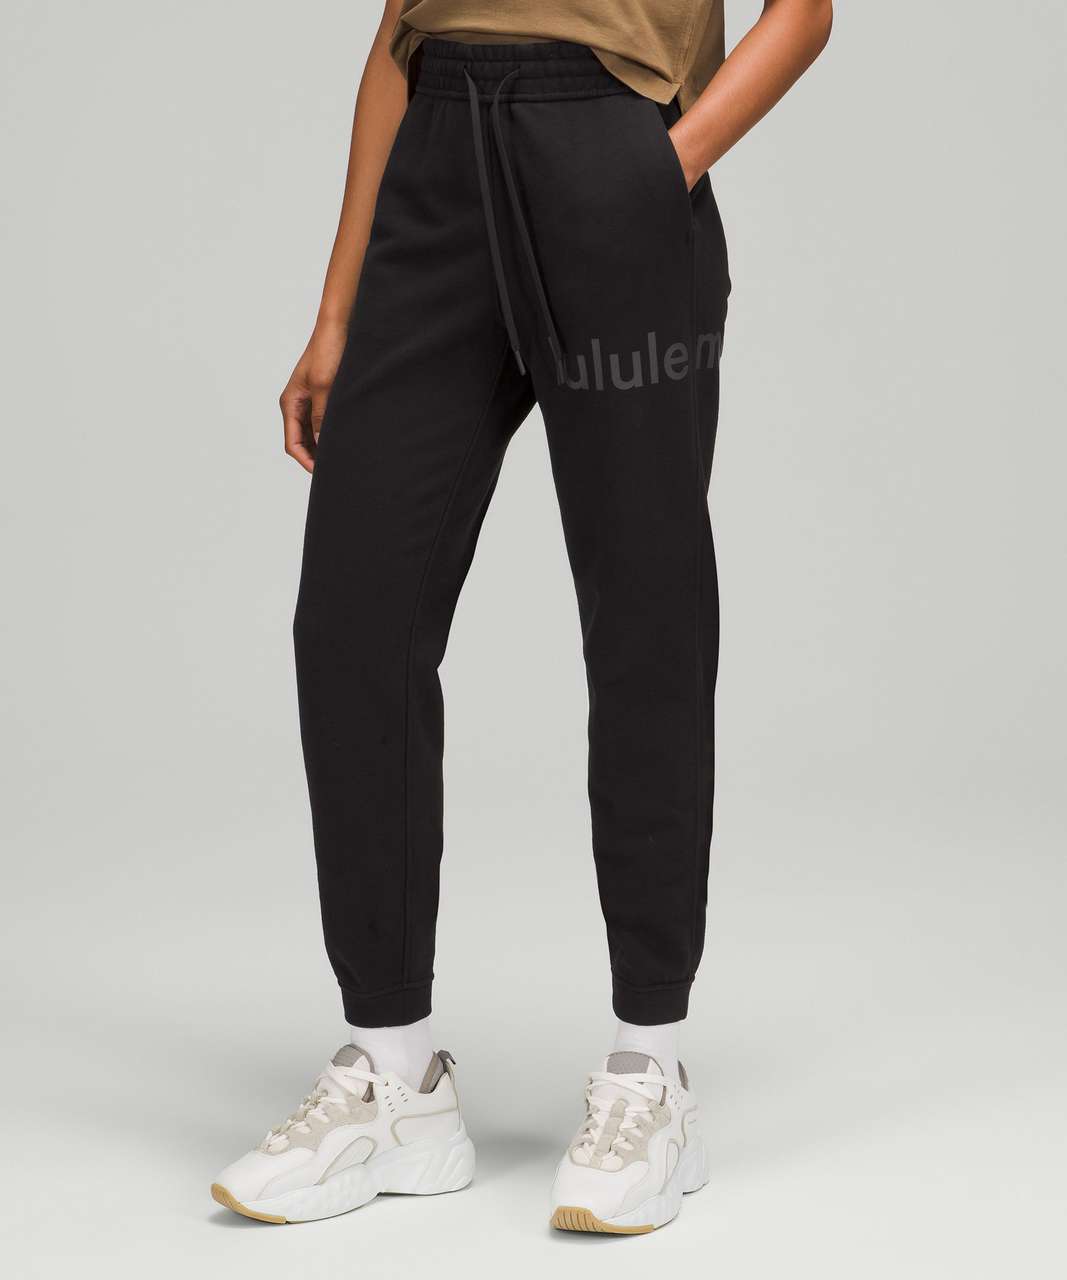 Lululemon Joggers Black Size 2 - $60 (38% Off Retail) - From Brylee